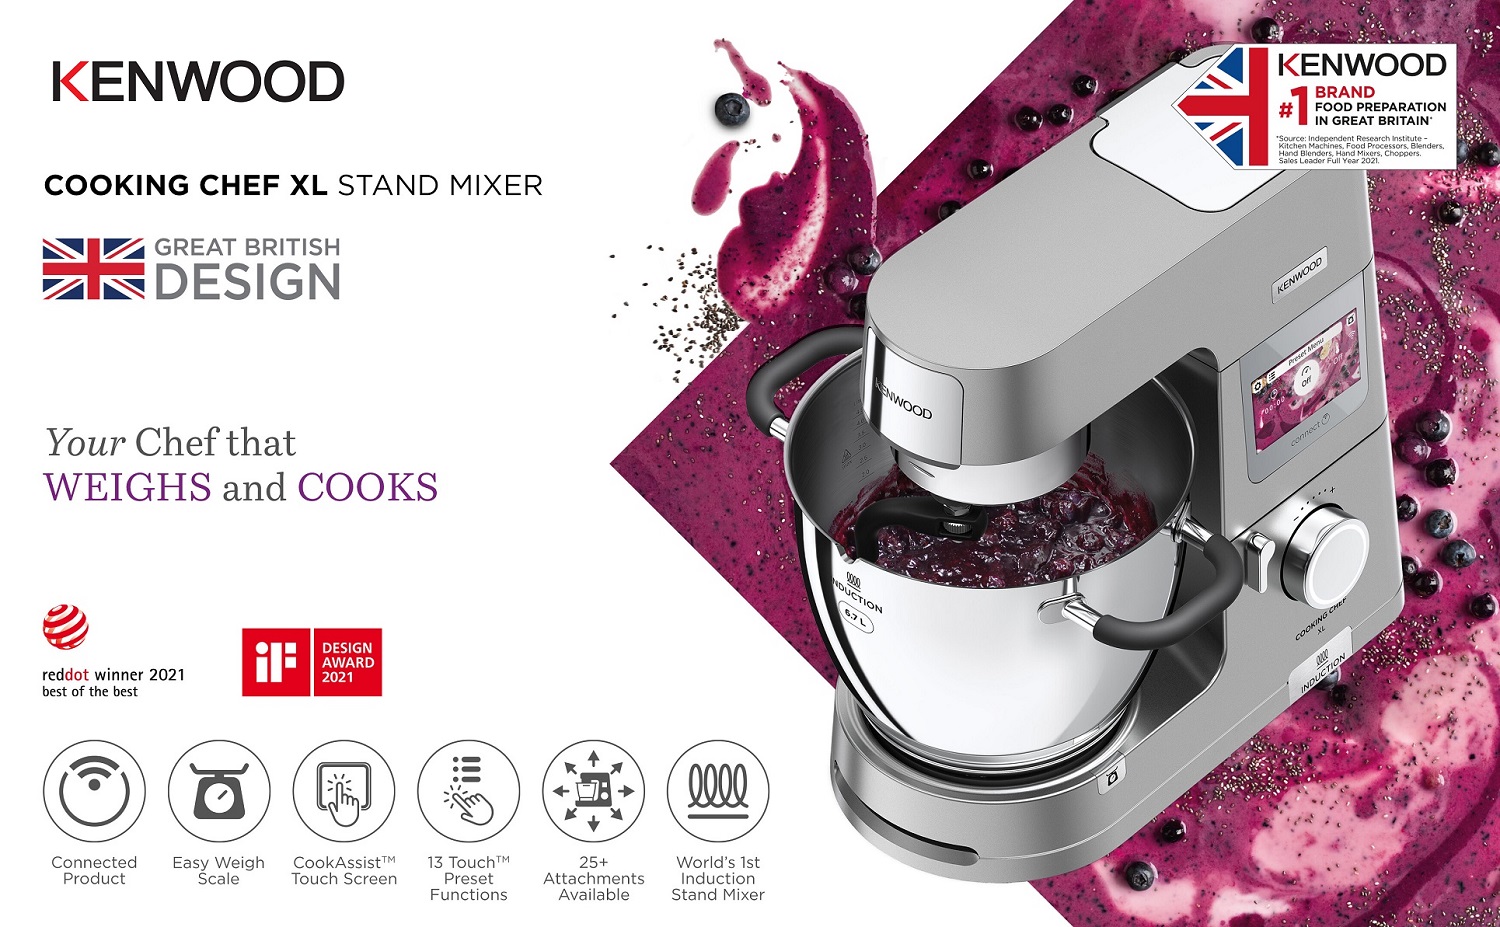 Shop Kenwood products in abdulwahed.com, the authorized dealer for